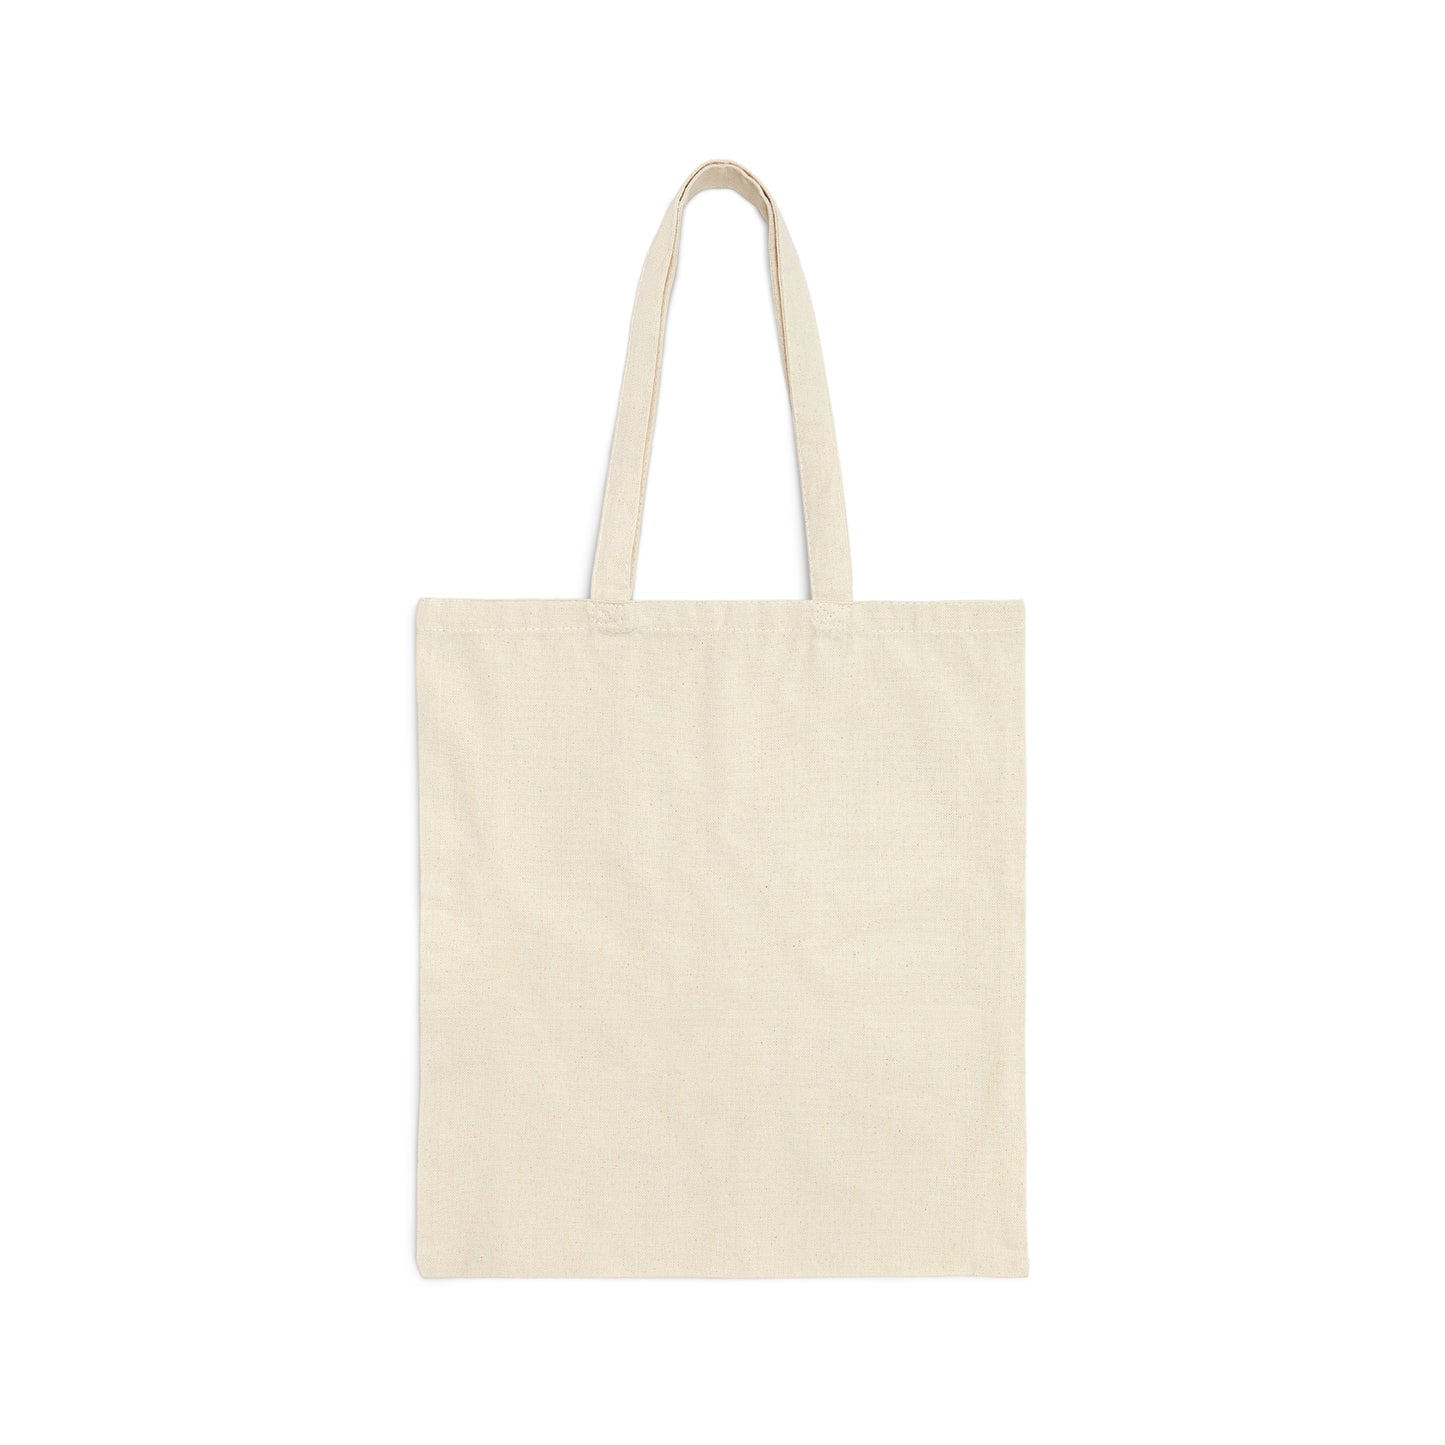 Canvas Tote Shopping Bag, Free Parking Space